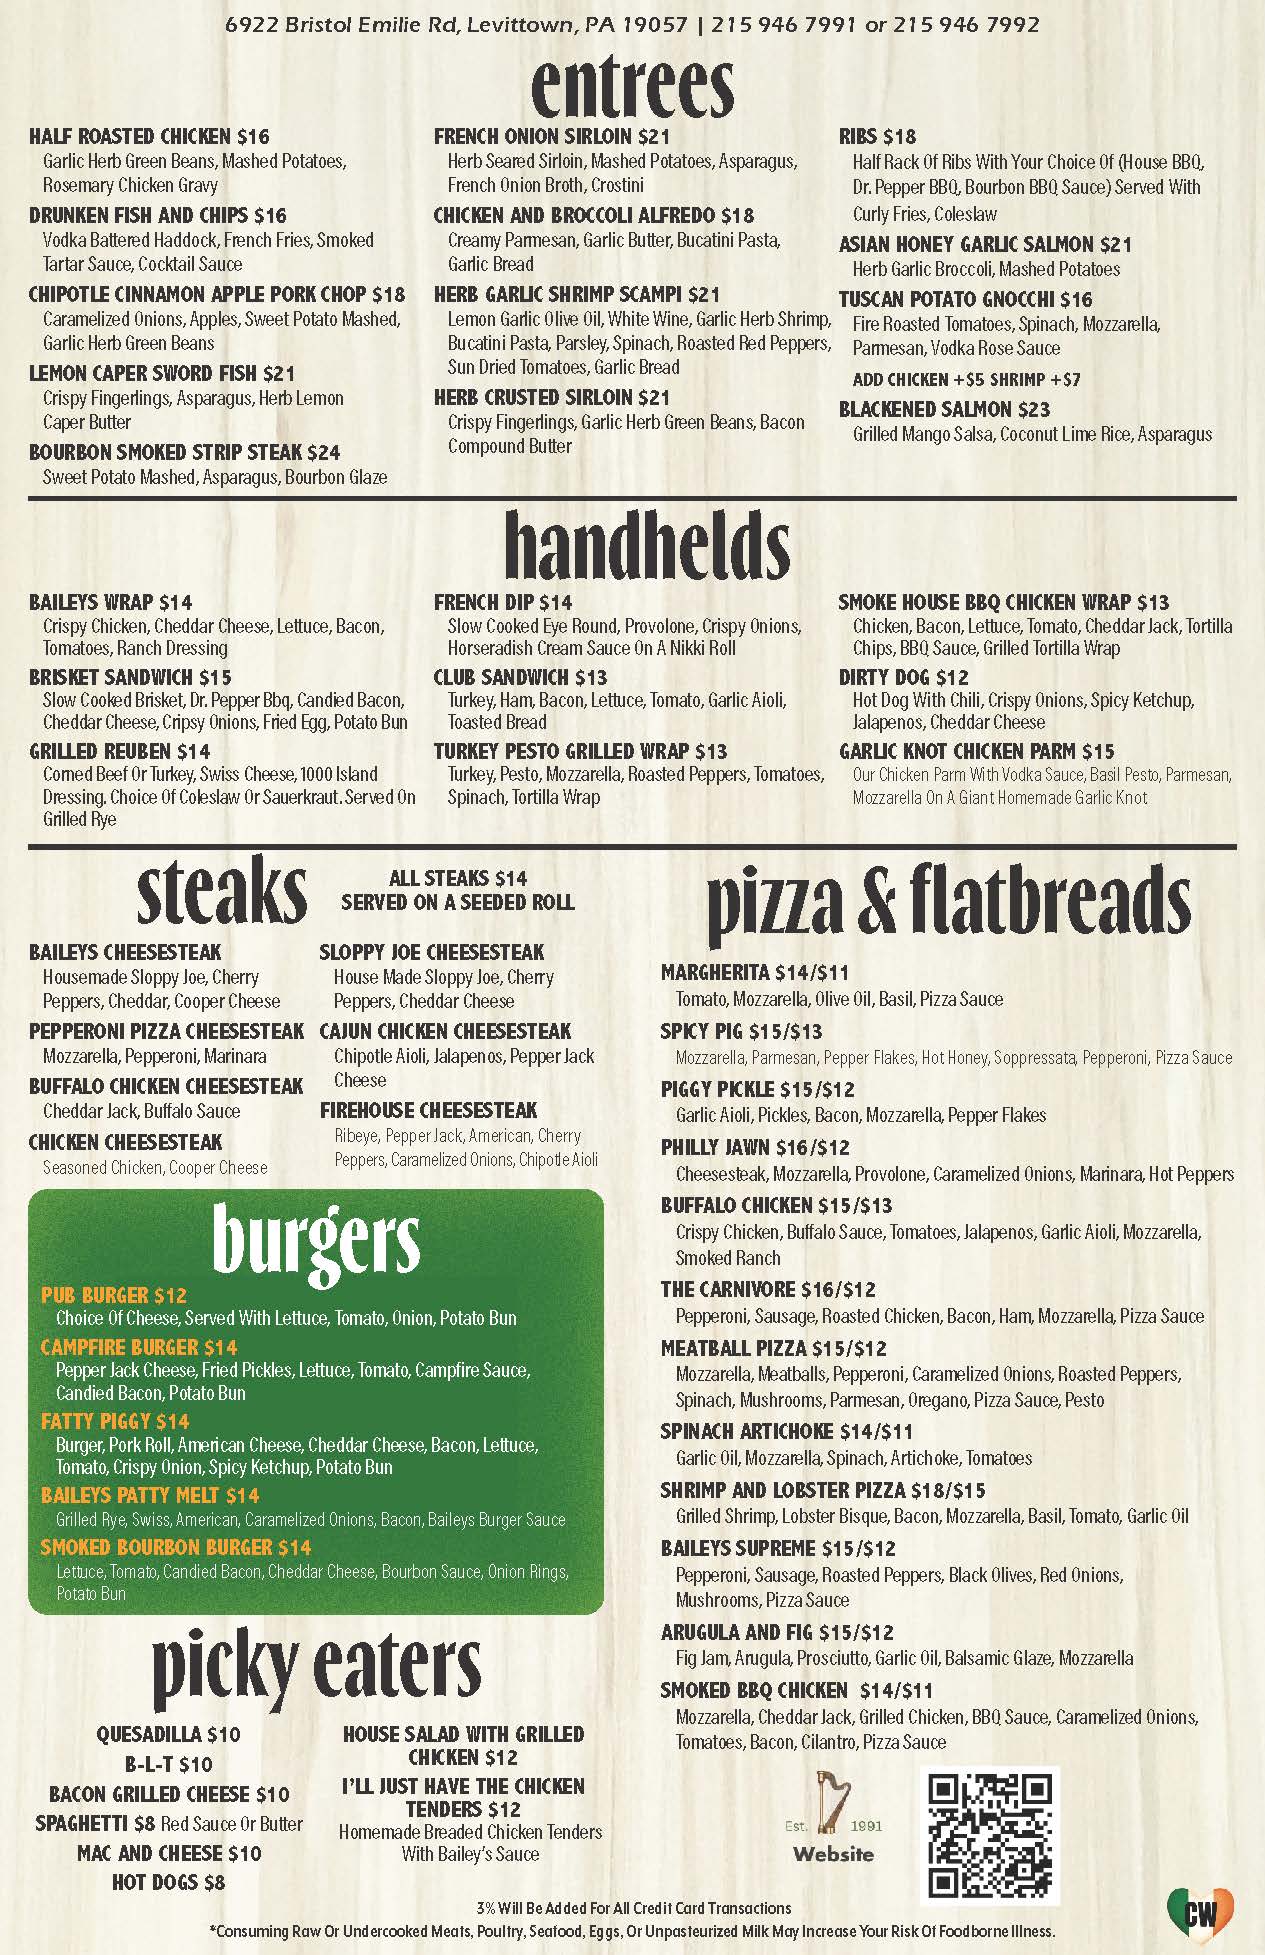 Menu with various food options including appetizers, wraps, sandwiches, burgers, steaks, pizzas, and salads displayed in different sections with prices listed.